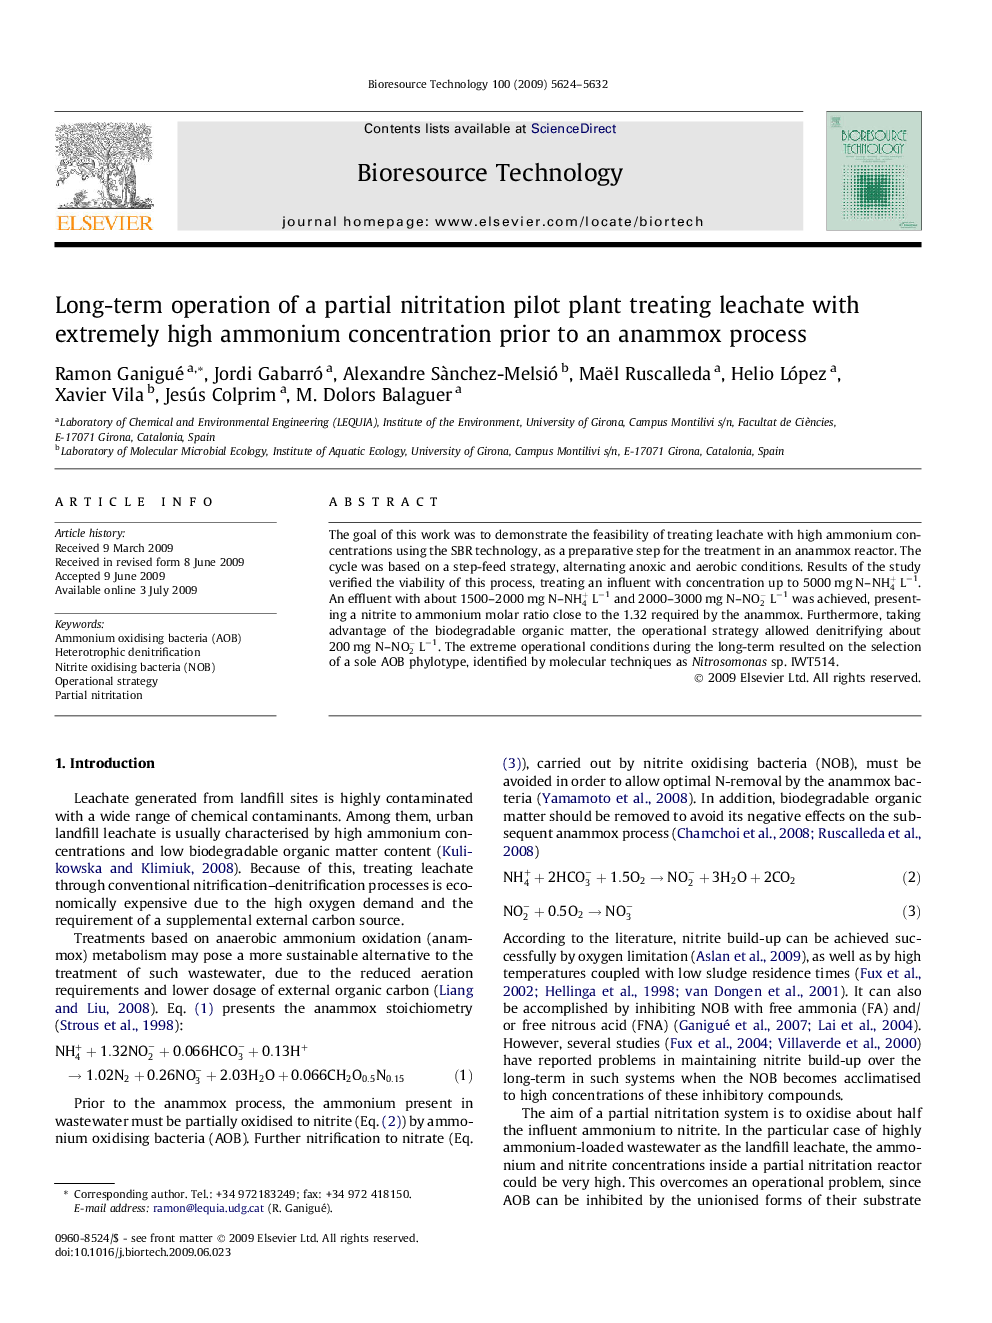 Long-term operation of a partial nitritation pilot plant treating leachate with extremely high ammonium concentration prior to an anammox process